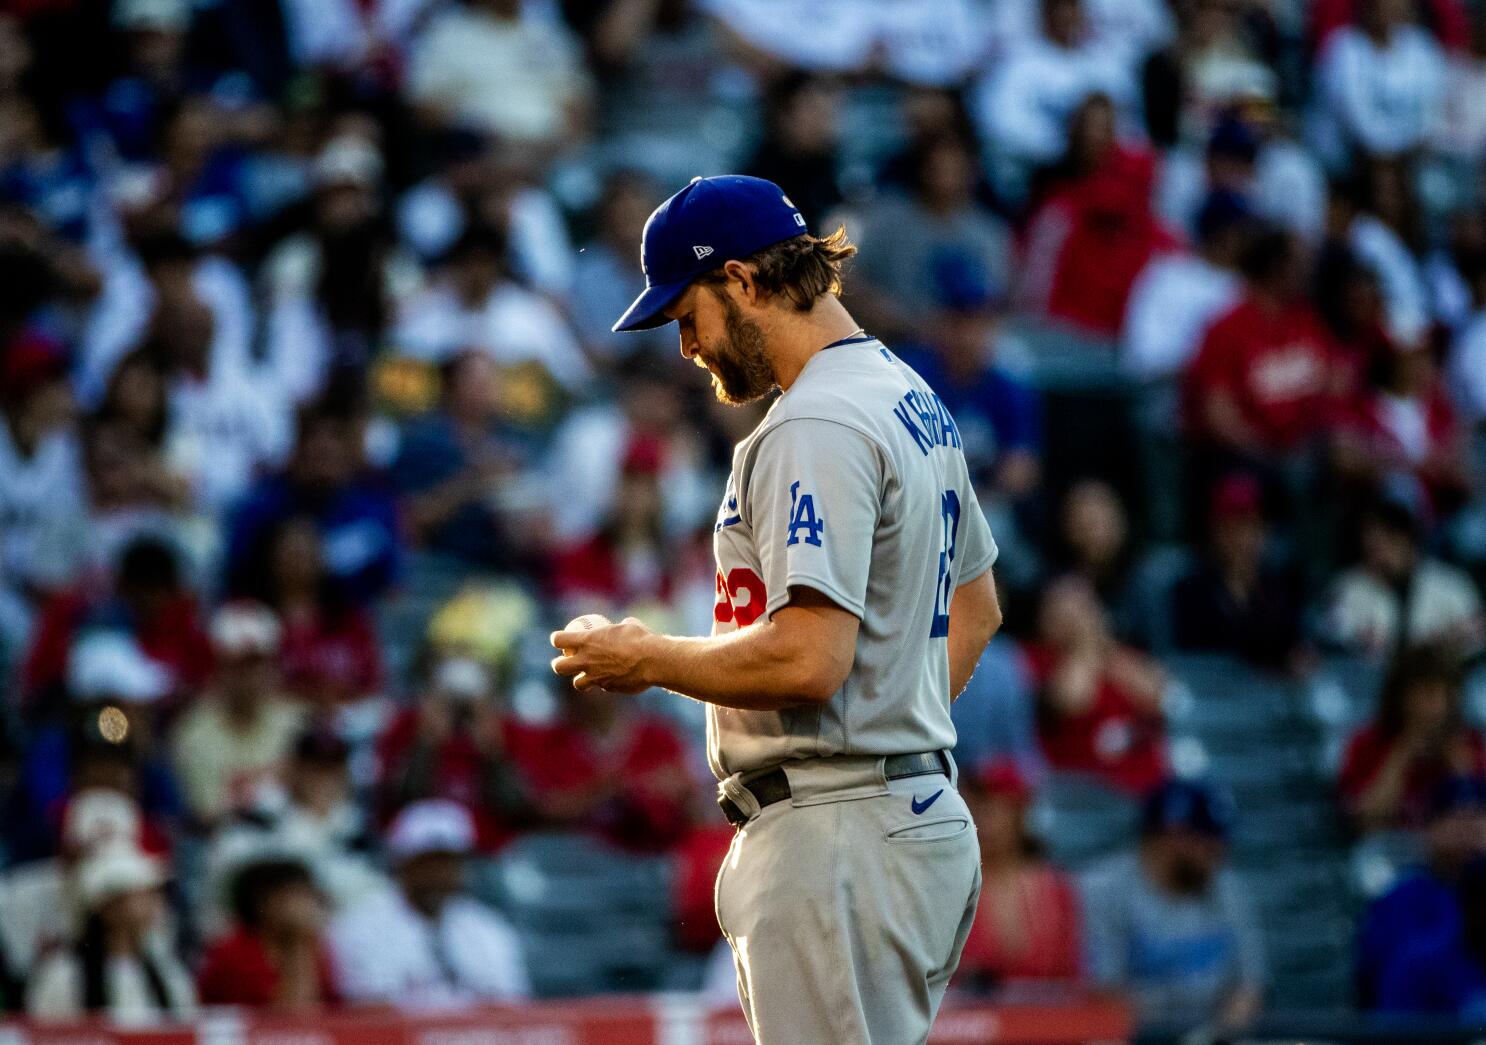 Clayton Kershaw is defying age to be the most dependable Dodger